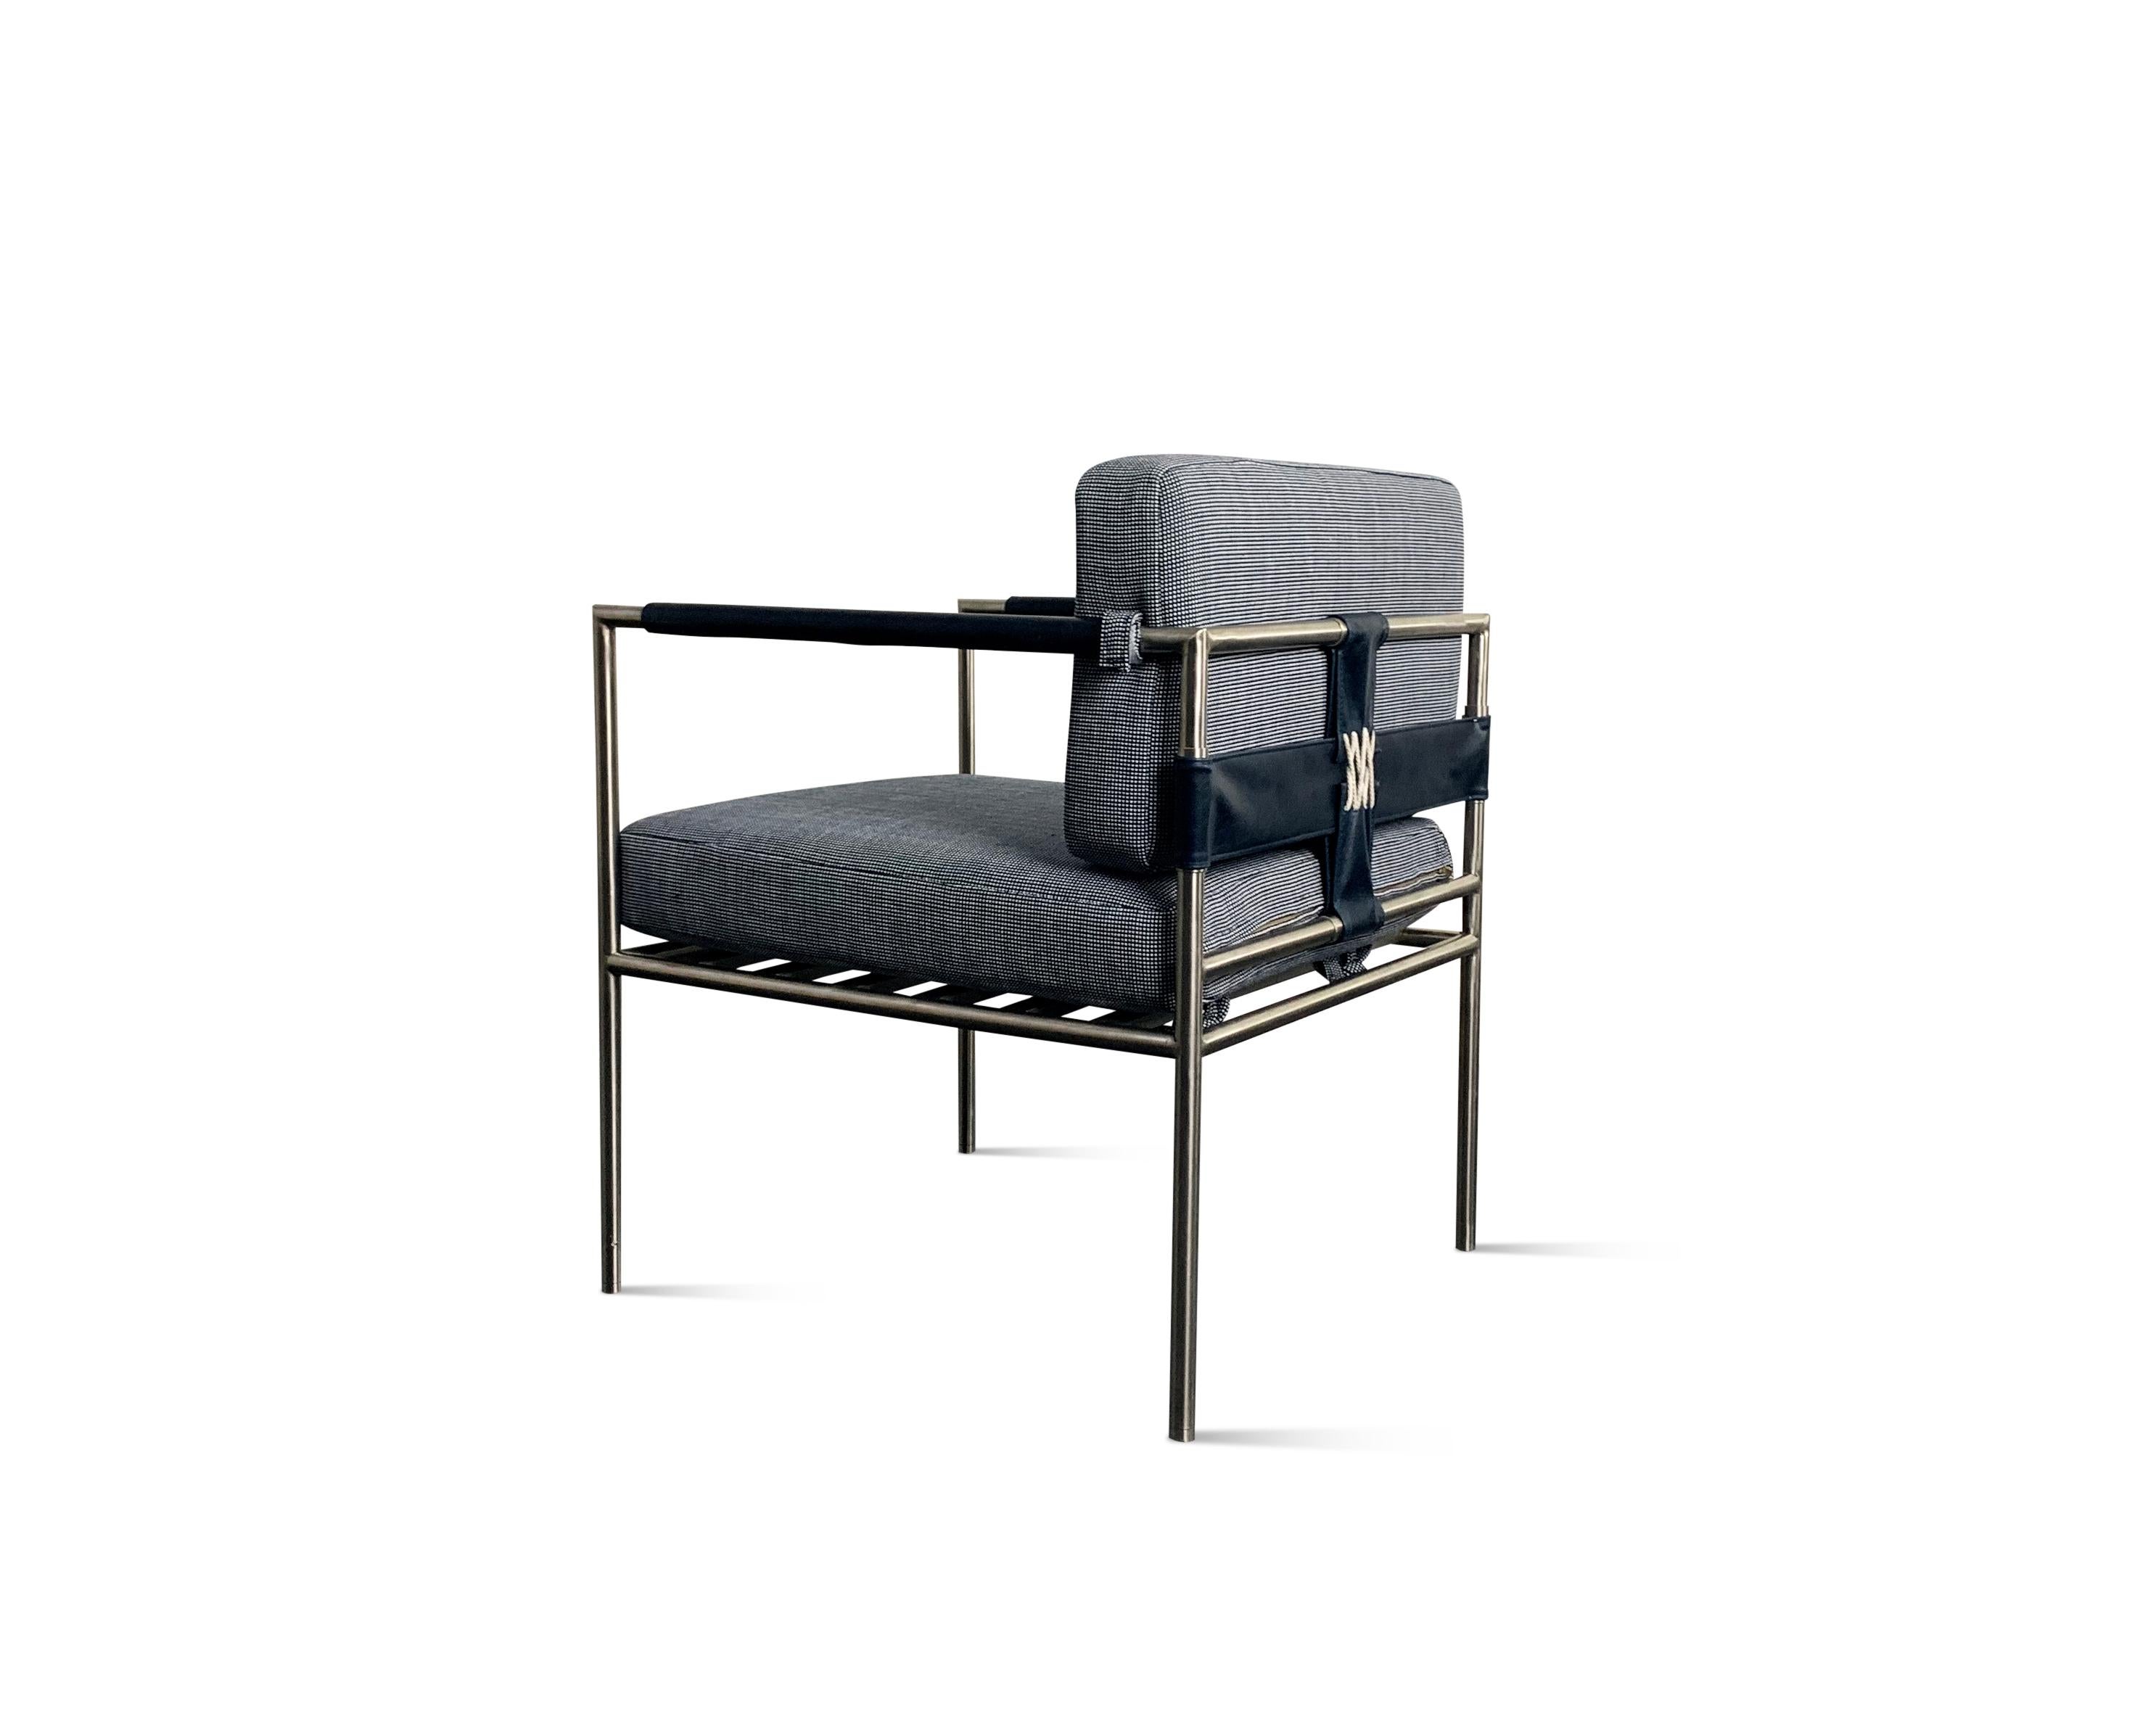 Contemporary Modern Outdoor Upholstered Steel Lounge Armchair from Costantini, Rinaldo For Sale